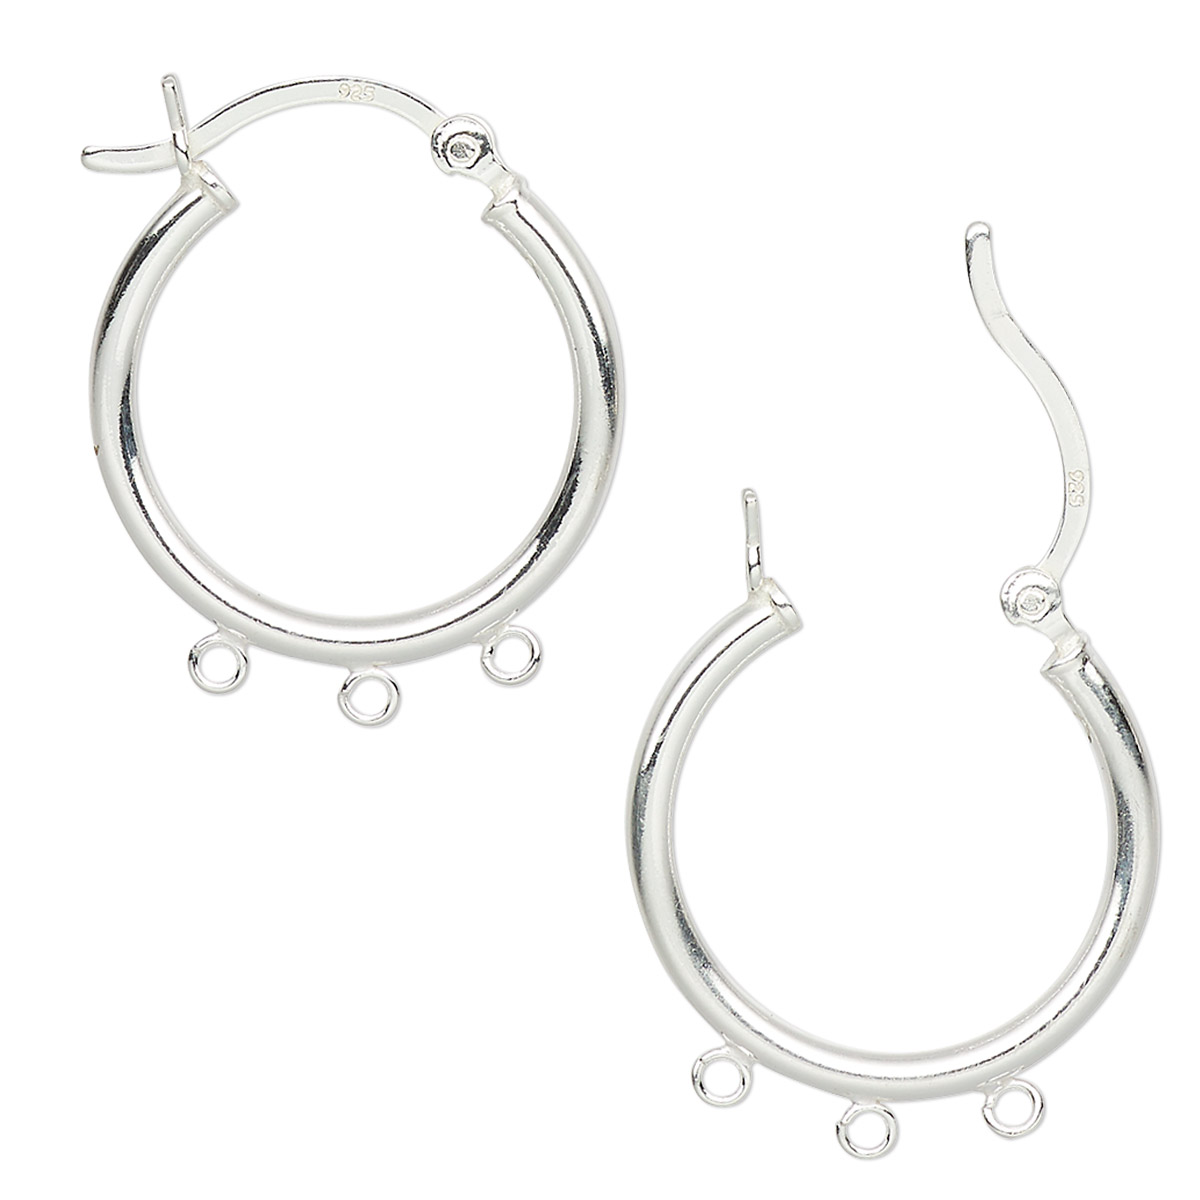 Earring, sterling silver, 22mm round hoop with 3 open loops and latch ...